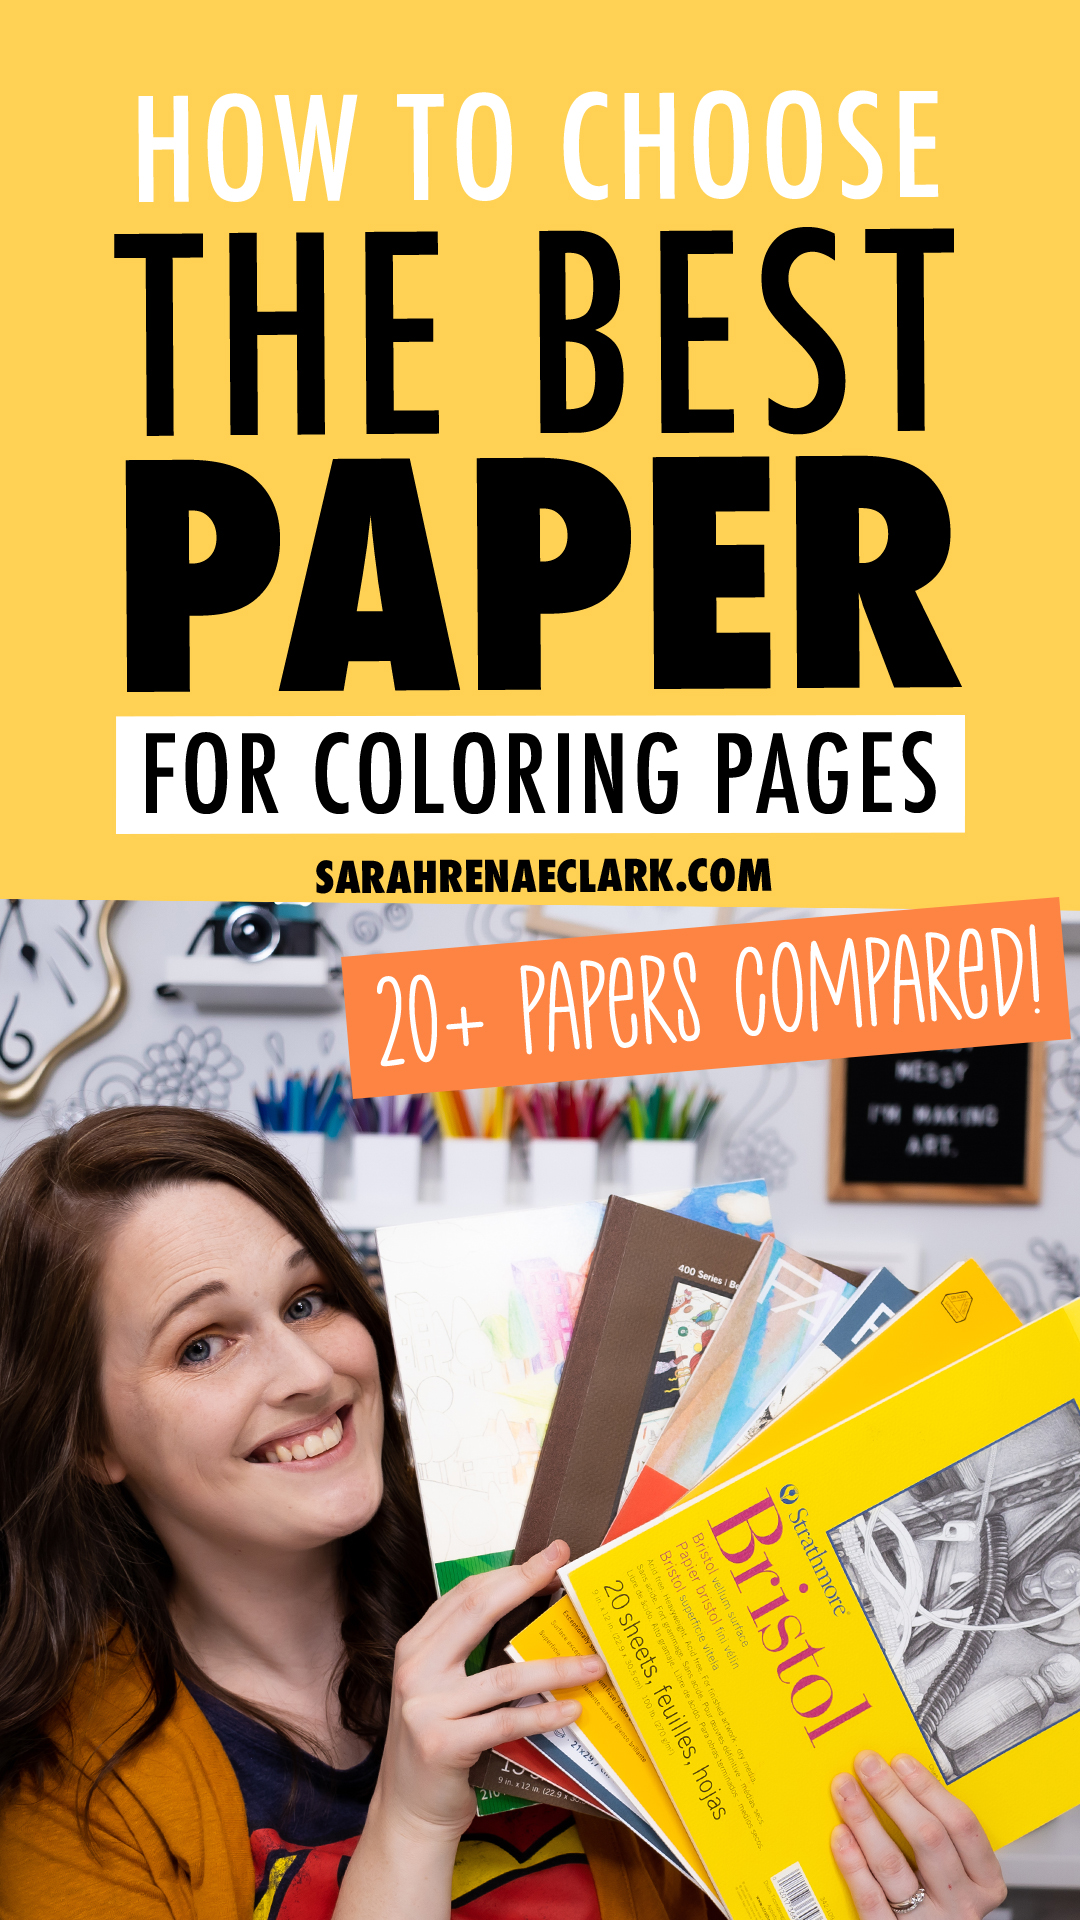 how to choose the best paper 3 Sarah Renae Clark Coloring Book